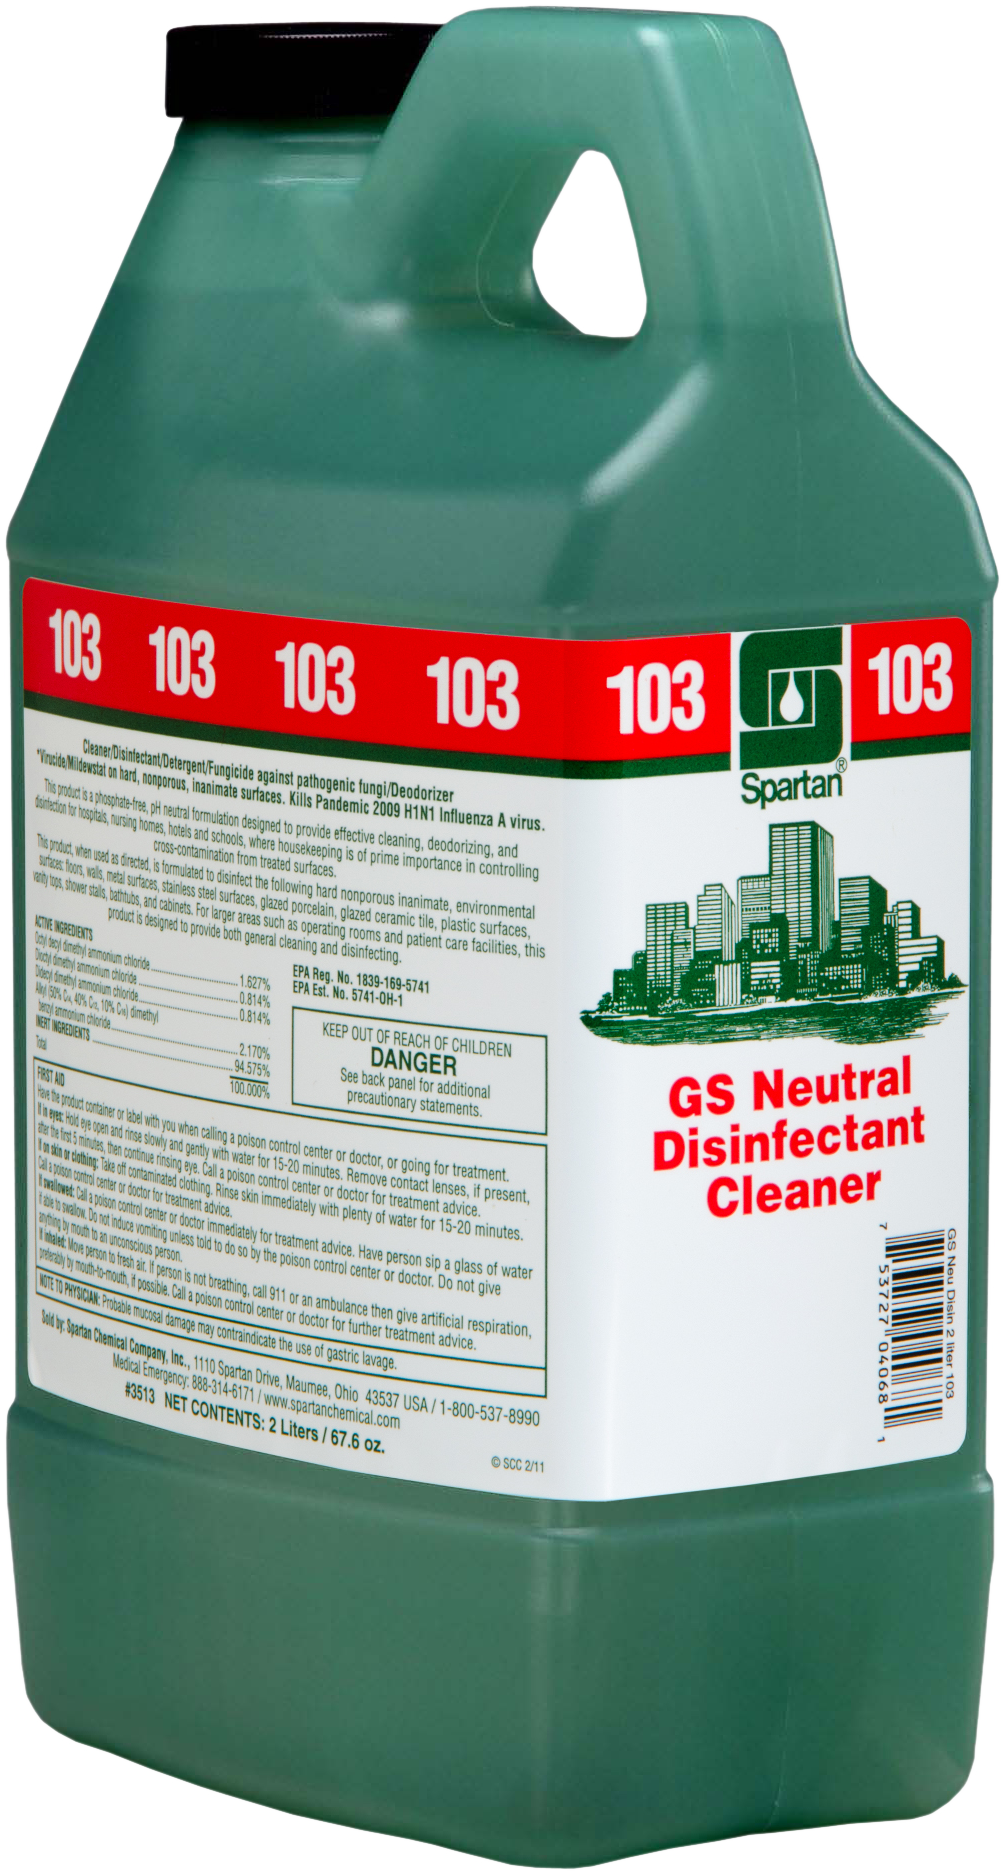 GS Neutral disinfectant cleaner concentrate formulated to kill a wide variety of microorganisms